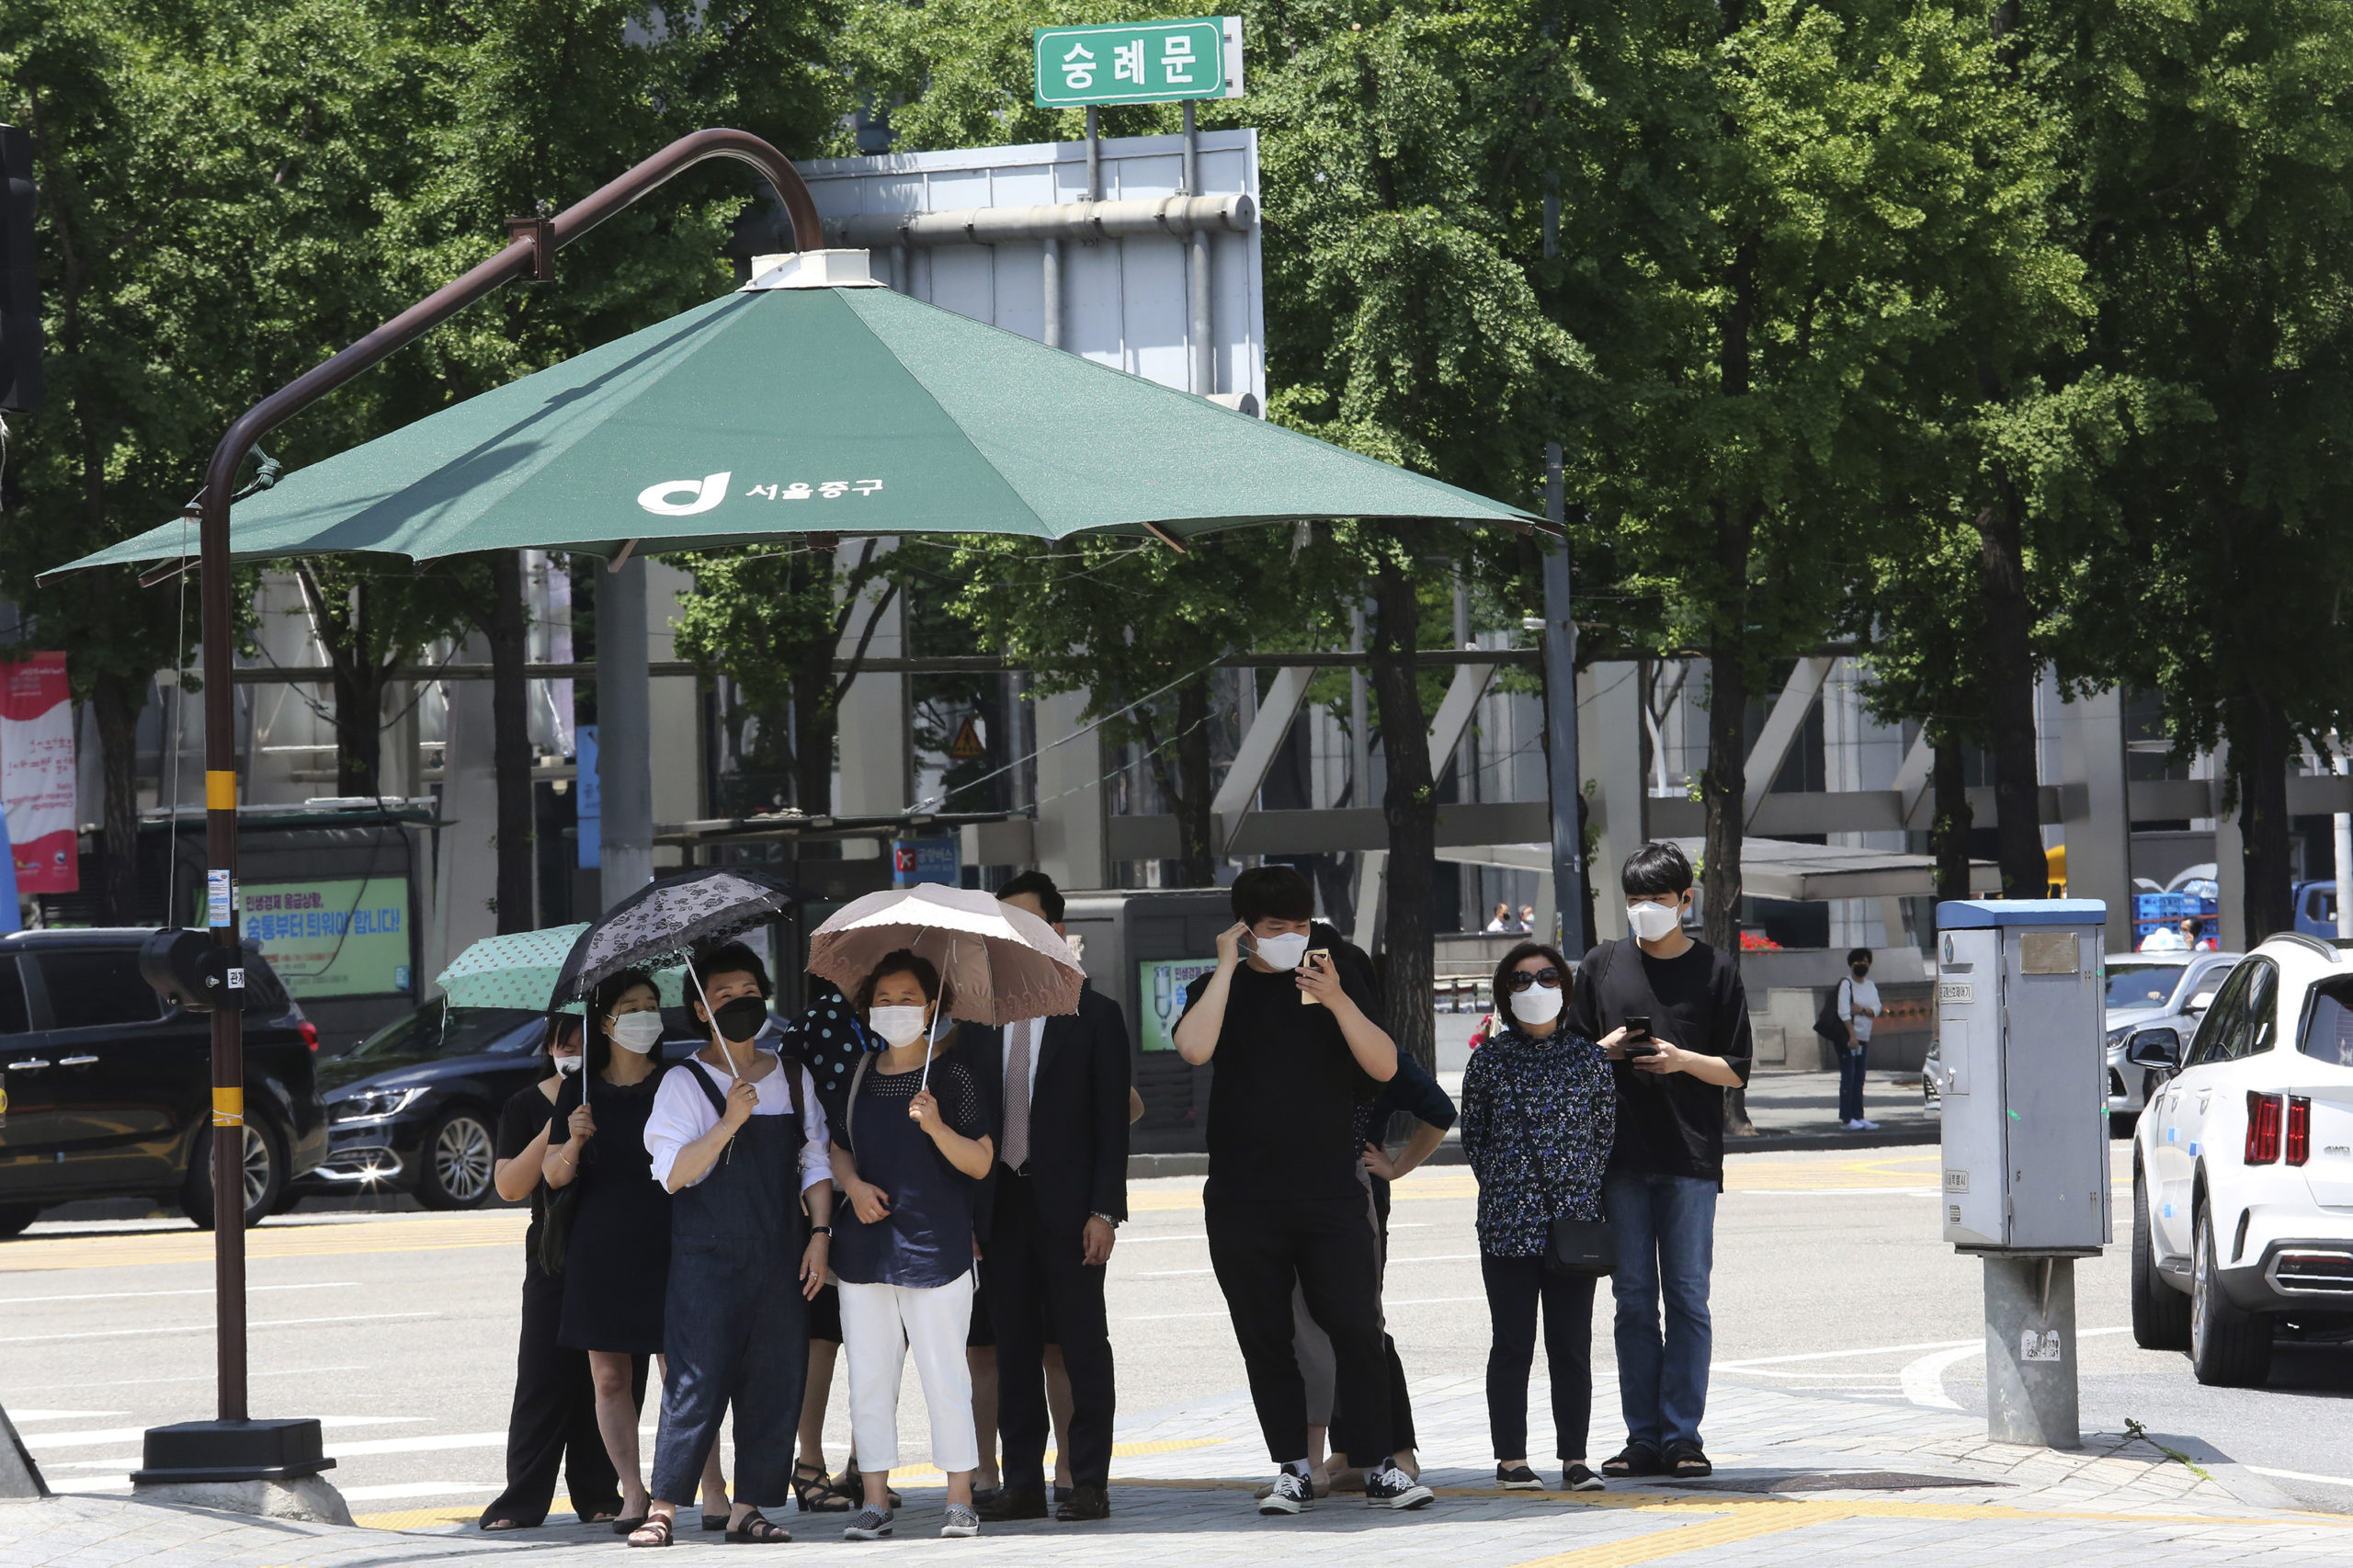 People, wearing face mask, wait to cross the road in Seoul, South Korea, Thursday, June 11, 2020. Just weeks ago, South Korea was celebrating its hard-won gains against the coronavirus, easing social distancing, reopening schools and promoting a tech-driven anti-virus campaign President Moon Jae-in has called “K-quarantine.” But a resurgence of infections in the Seoul region where half of South Korea’s 51 million people live is threatening the country’s success story and prompting health authorities to warn that action must be taken now to stop a second wave.(AP Photo/Ahn Young-joon)